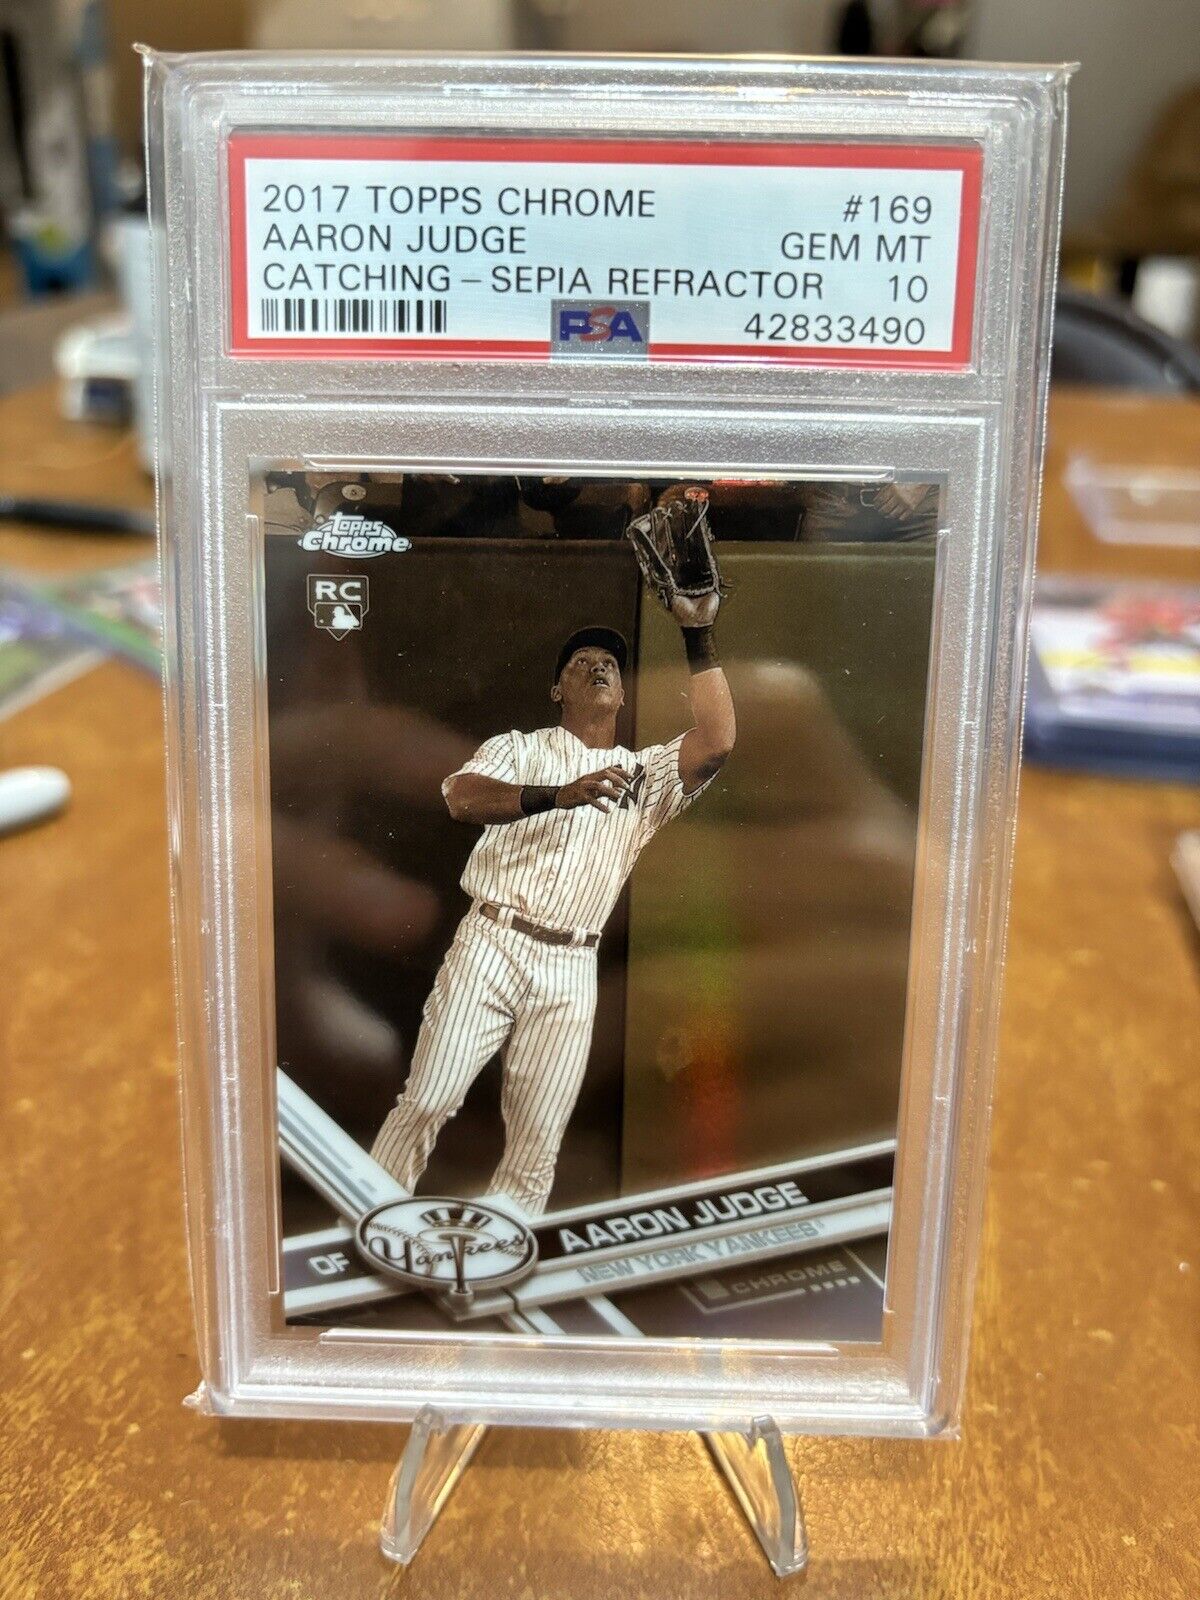 2017 Topps Chrome Catching Sepia Refractor Aaron Judge ROOKIE RC #169 PSA 10 GEM